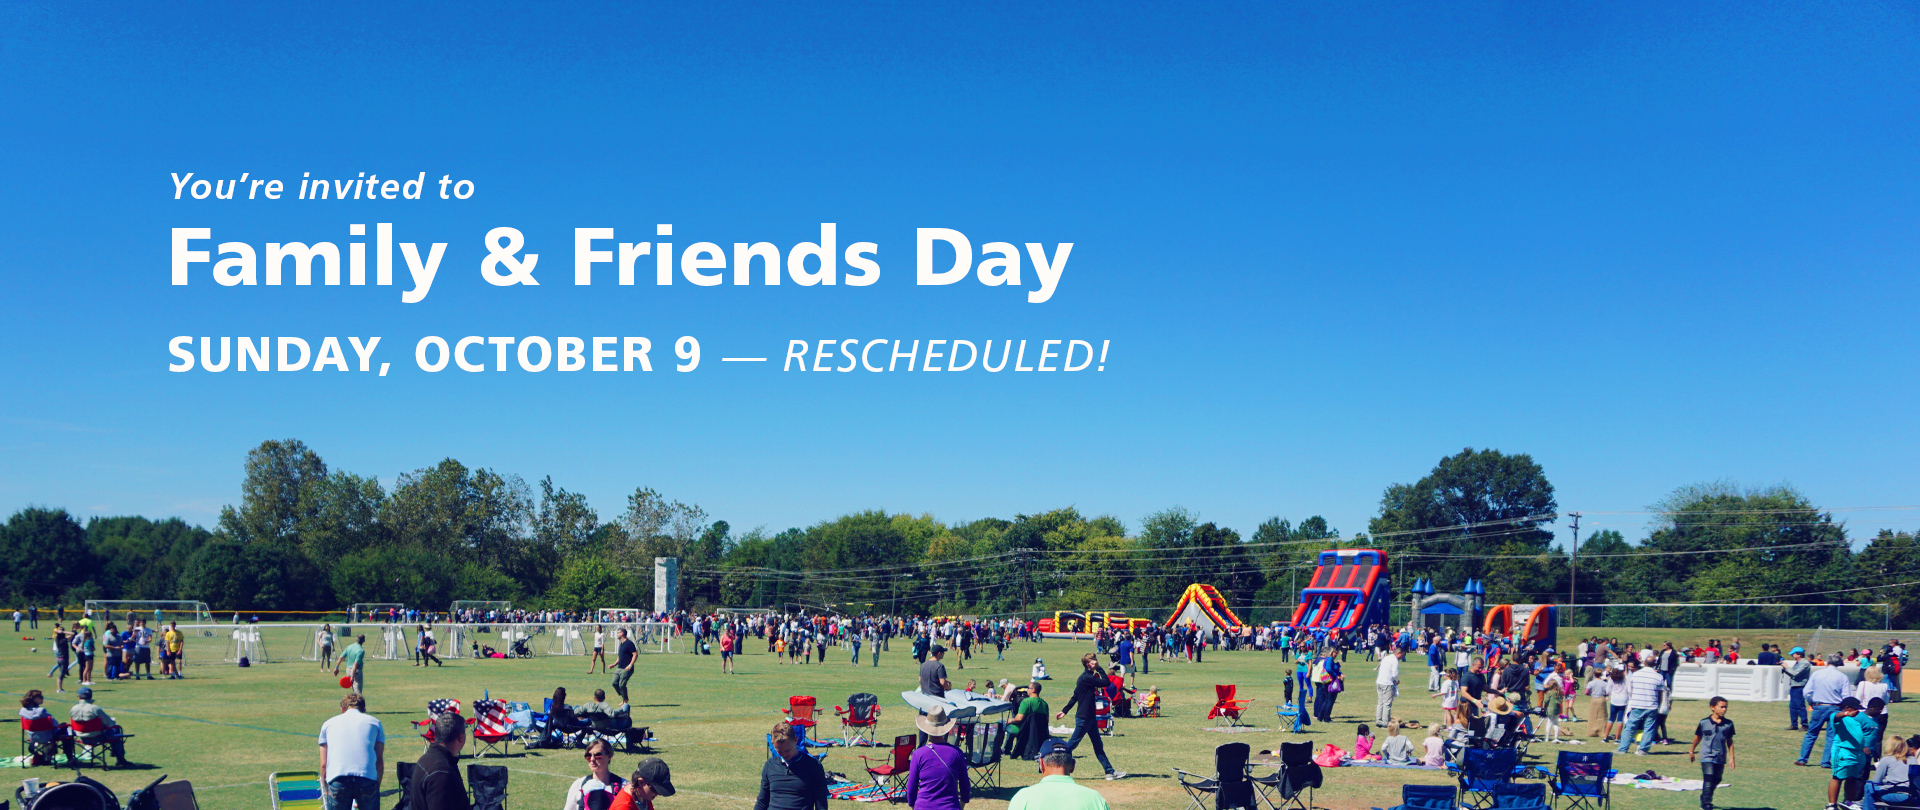 Family & Friends Day 
RESCHEDULED to Sunday, October 9
Worship, Lunch & Fellowship
FREE — Fun for all ages!
